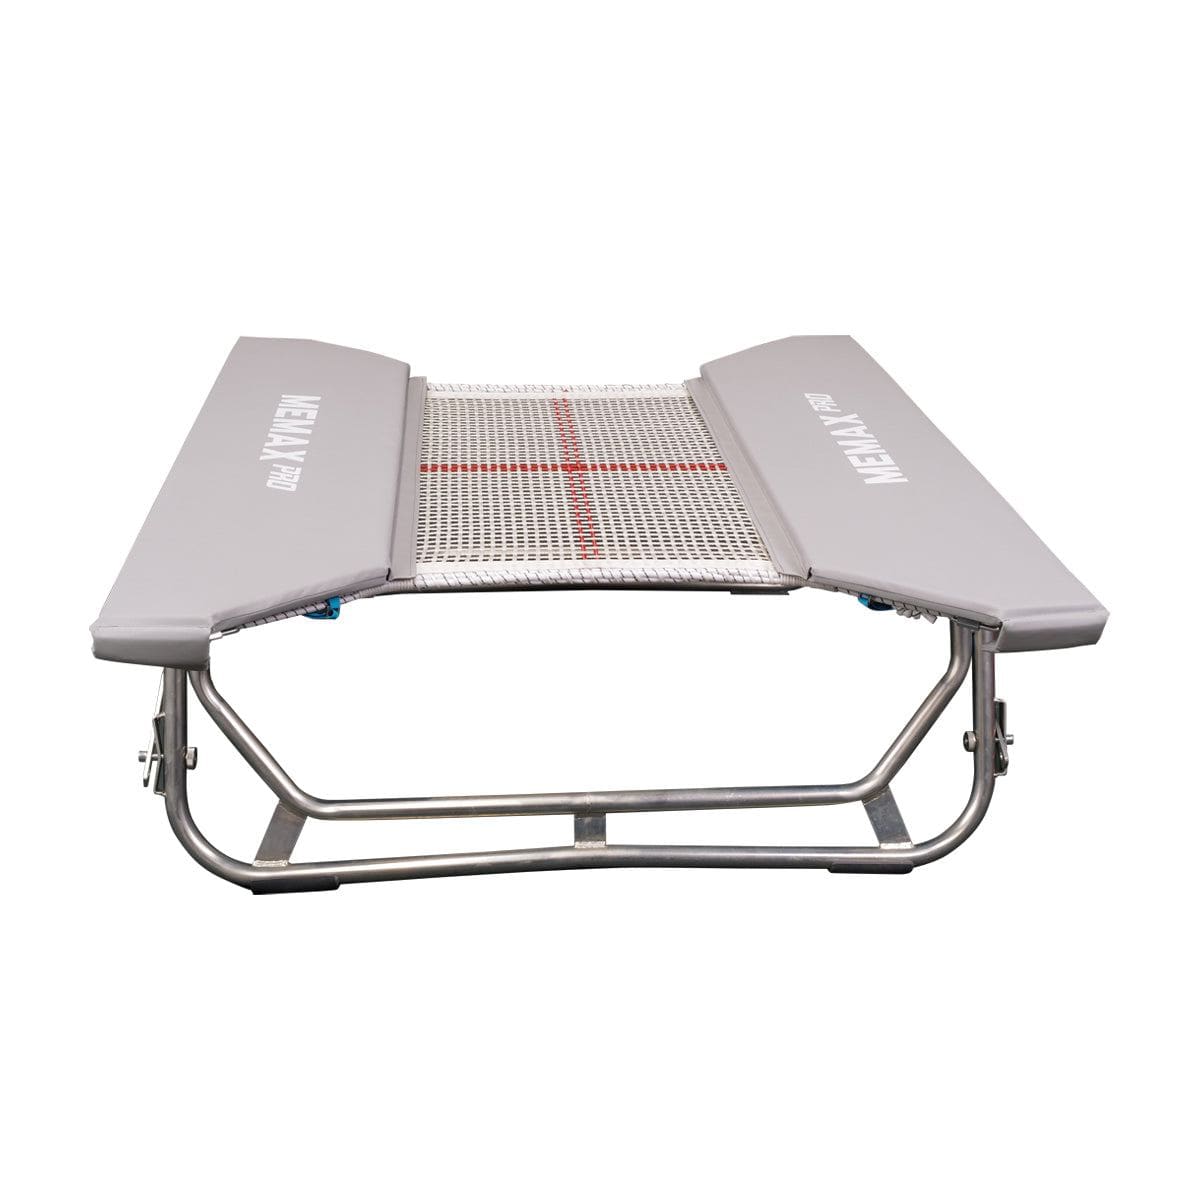 Open-End Trampoline with Safety Mat - 140x130cm - MEMAX Pro Series